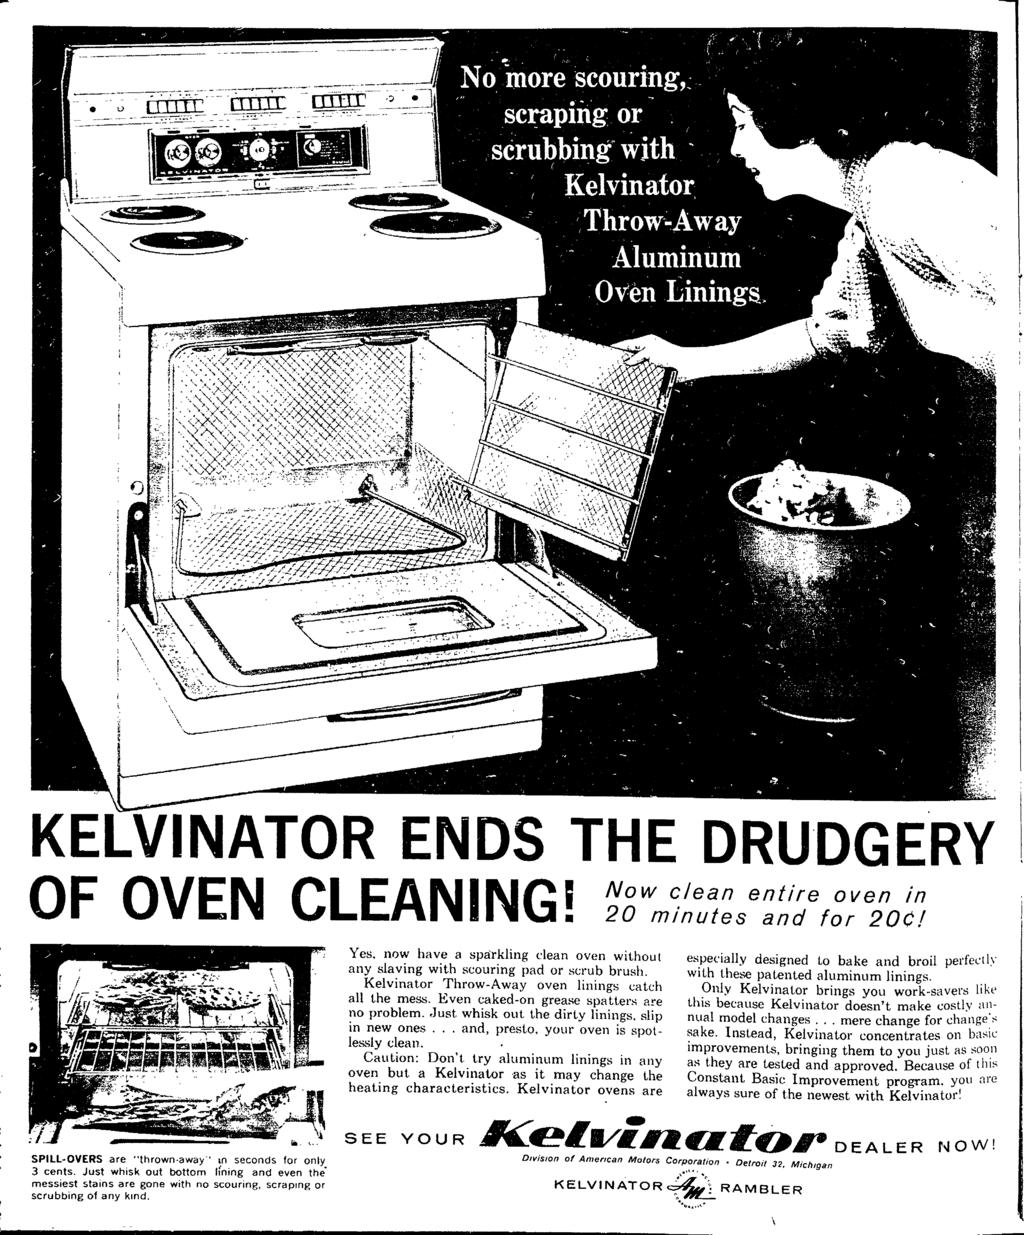 " f KELVNATOR ENDS THE DRUDGERY OF OVEN CLEANNG!